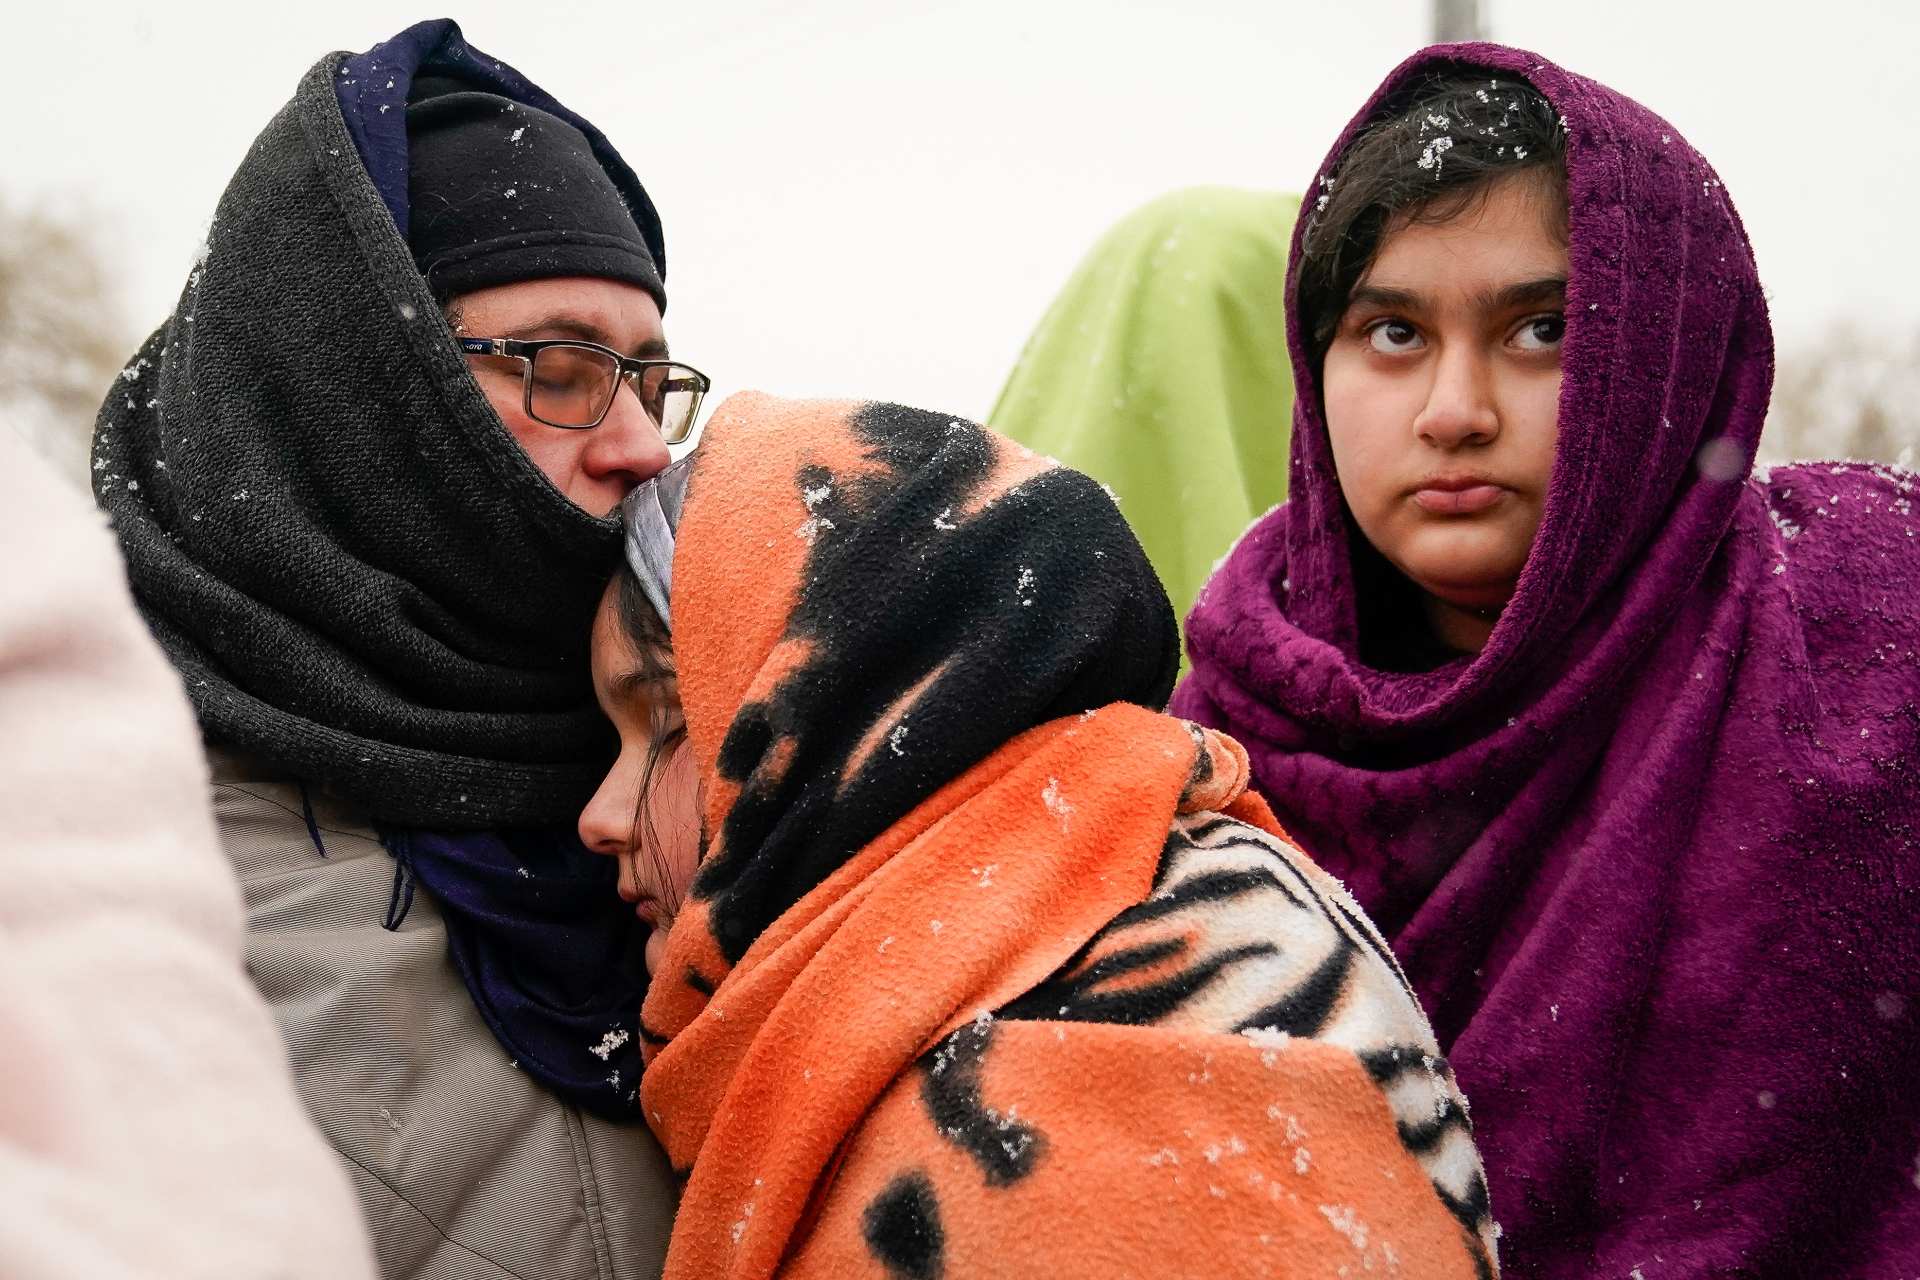 An Afghan family pictured among refugees arriving in Poland after fleeing from Ukraine in late February 2022 (Reuters)